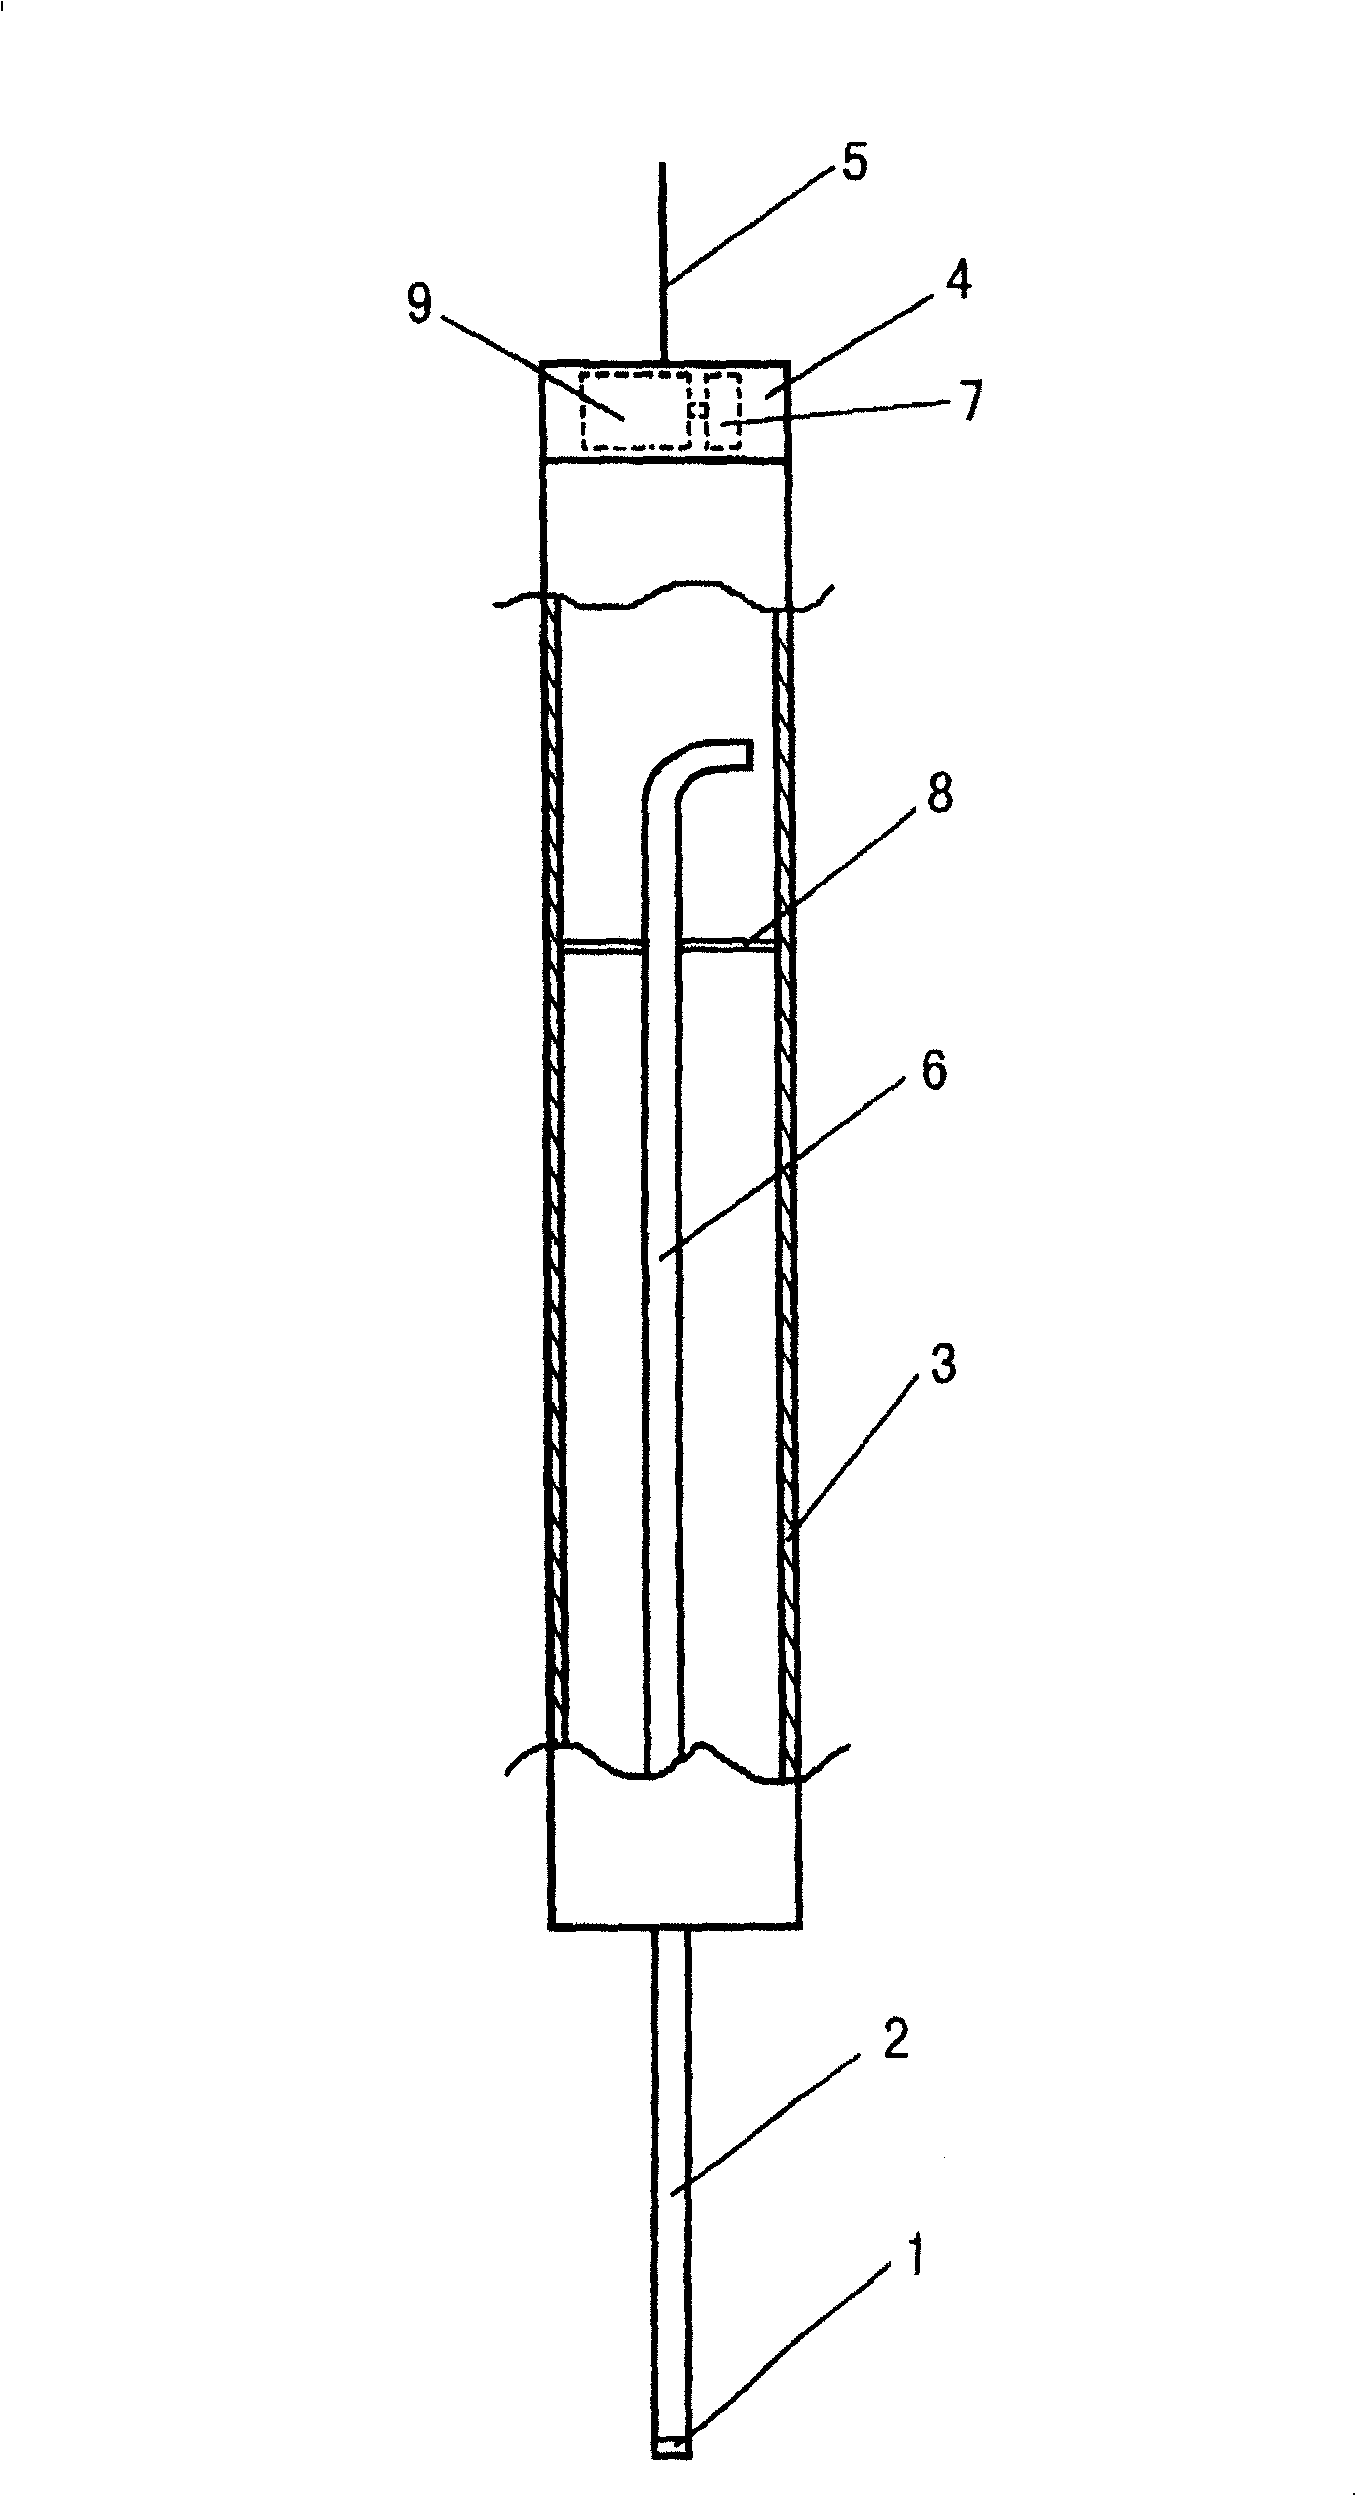 Method for enlarging bottom and pile making of immersed tube and prefabricated steel concrete under-reamed pile